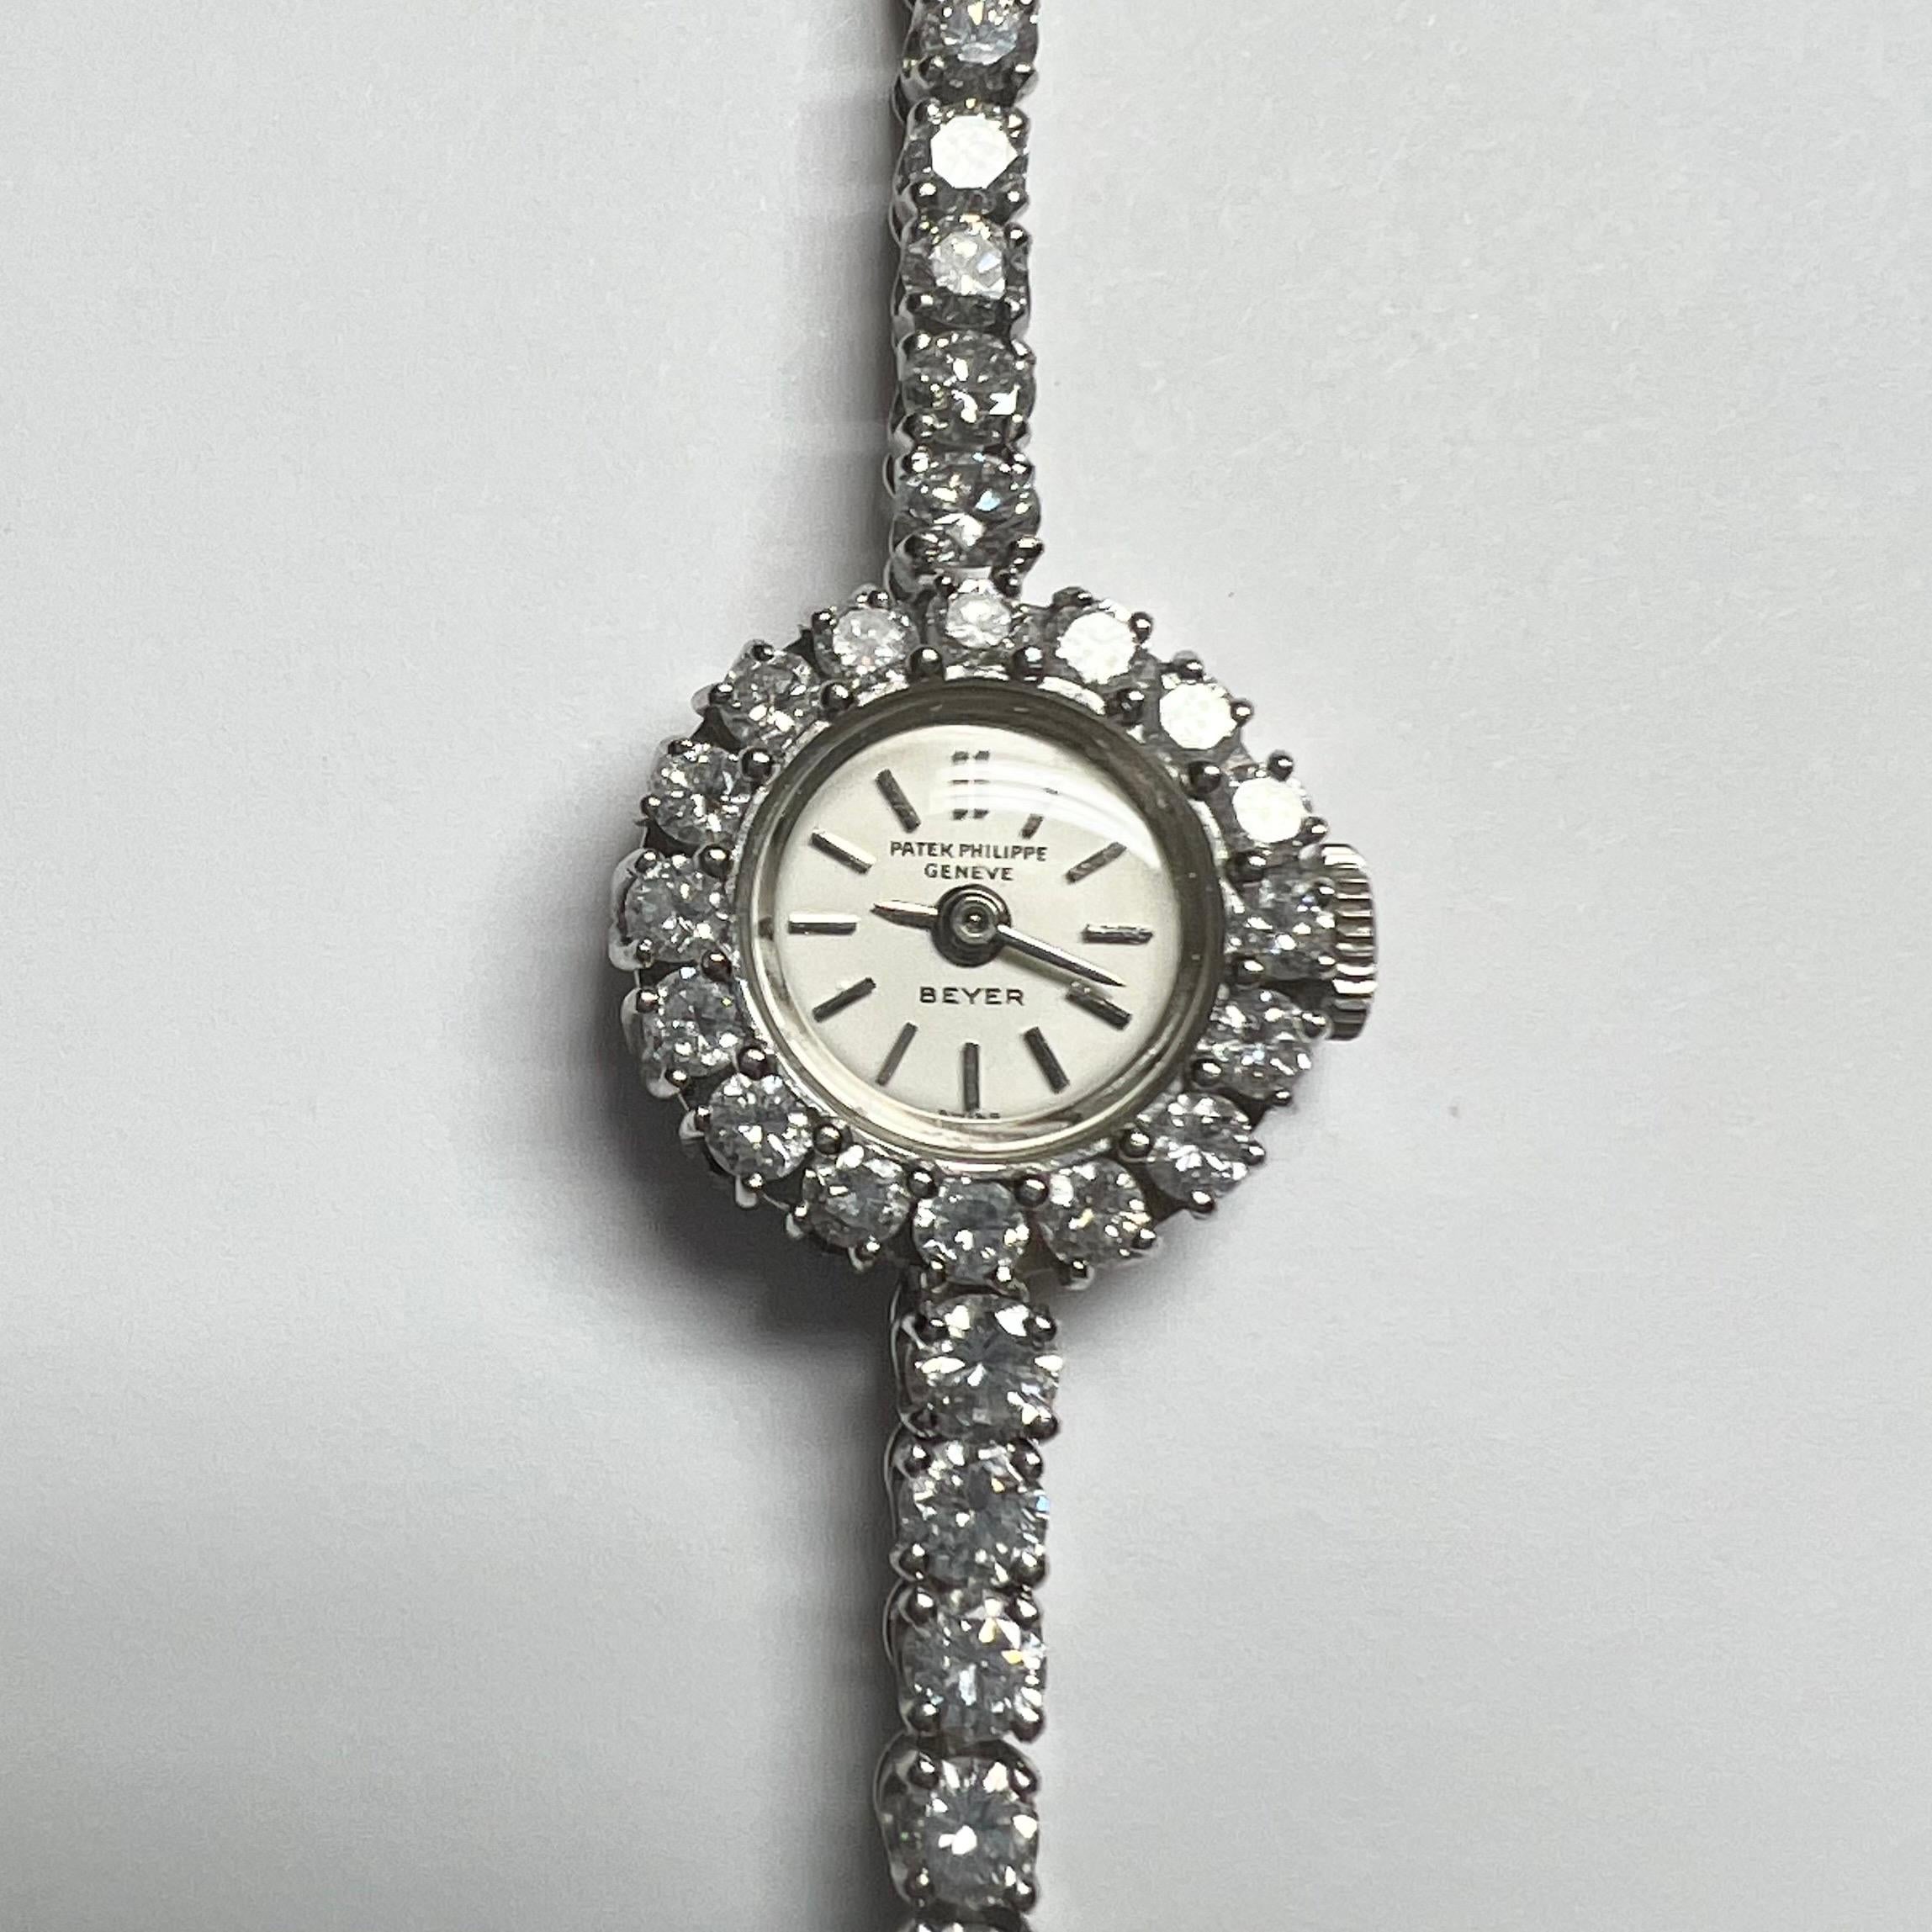 950 platinum and brilliant-cut diamond ladies wrist watch by Patek Philippe for Beyer, circa 1950s.

Elegant ladies wrist watch, the bracelet designed as a graduated line of 52 brilliant-cut diamonds, round case, the bezel decorated with 16